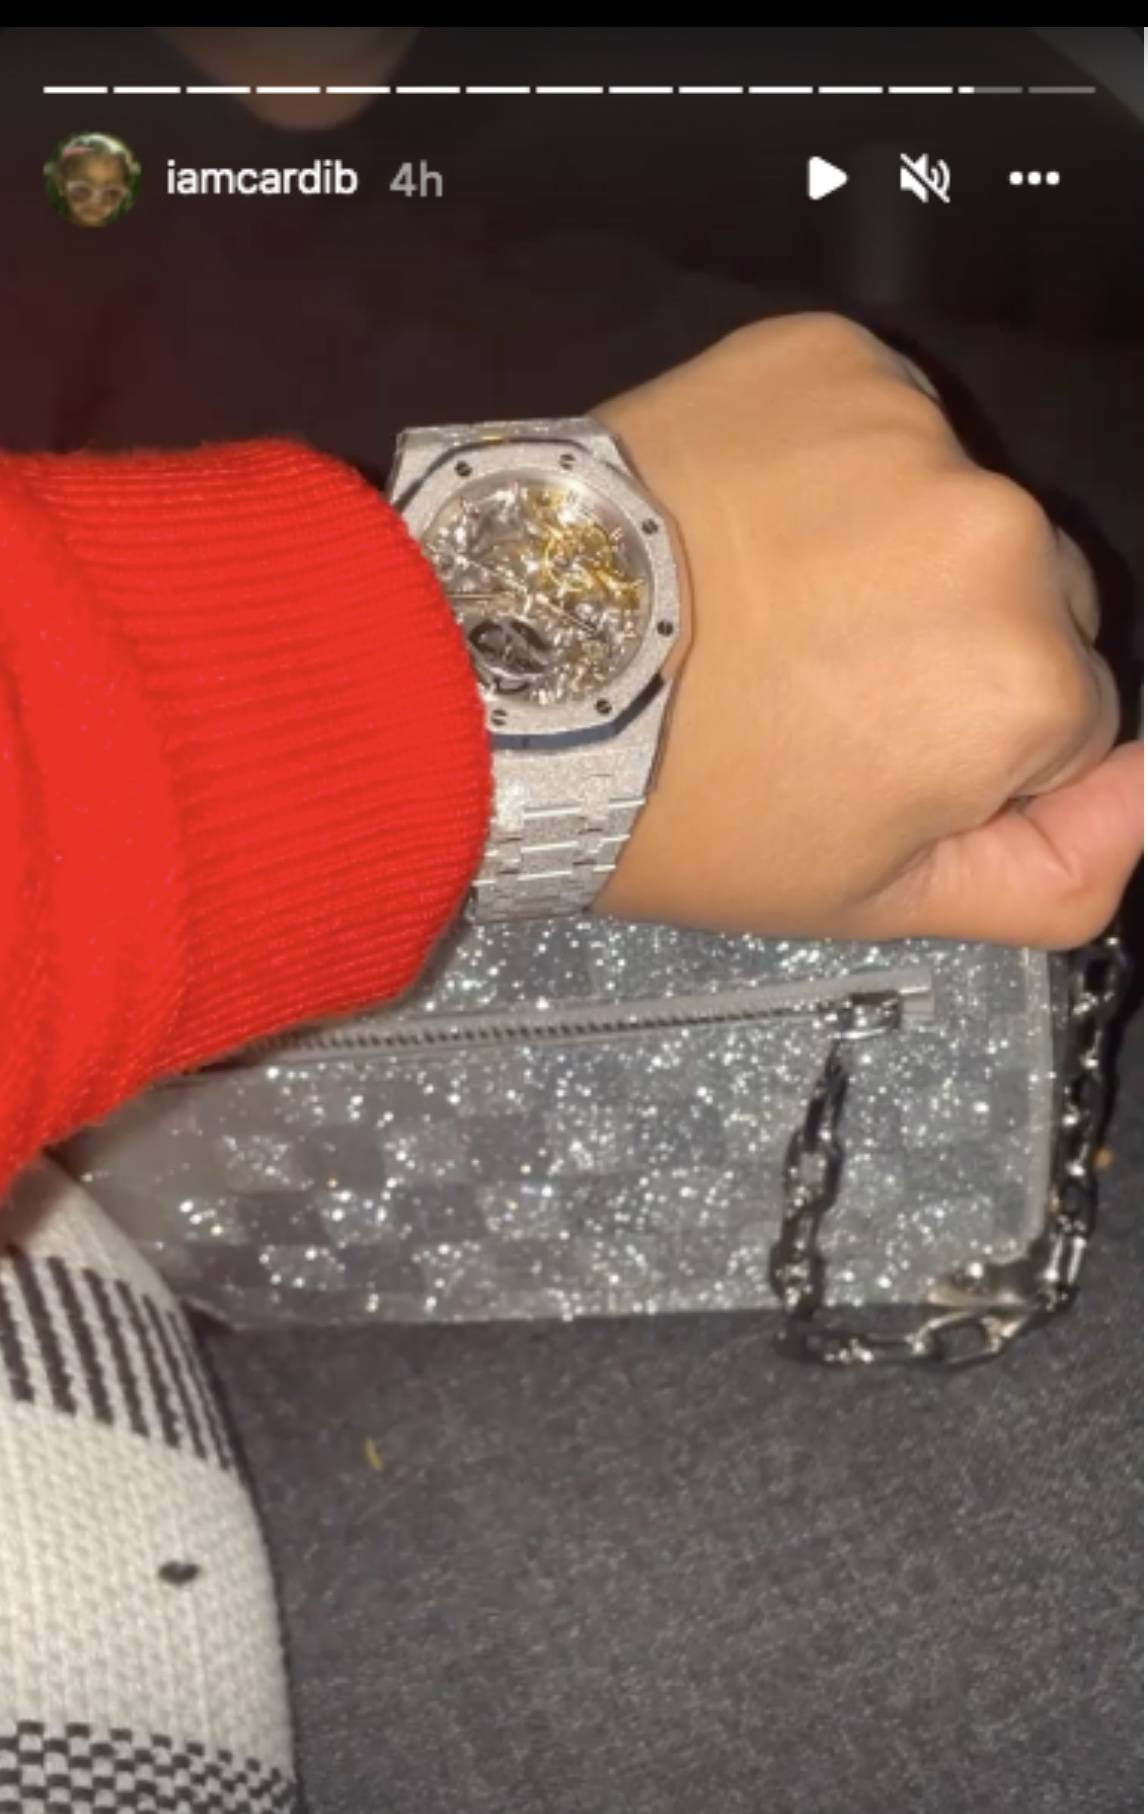 Offset Gifts Cardi B a $375,000 Watch After Giving Her Six Chanel Purses for Valentine's Day